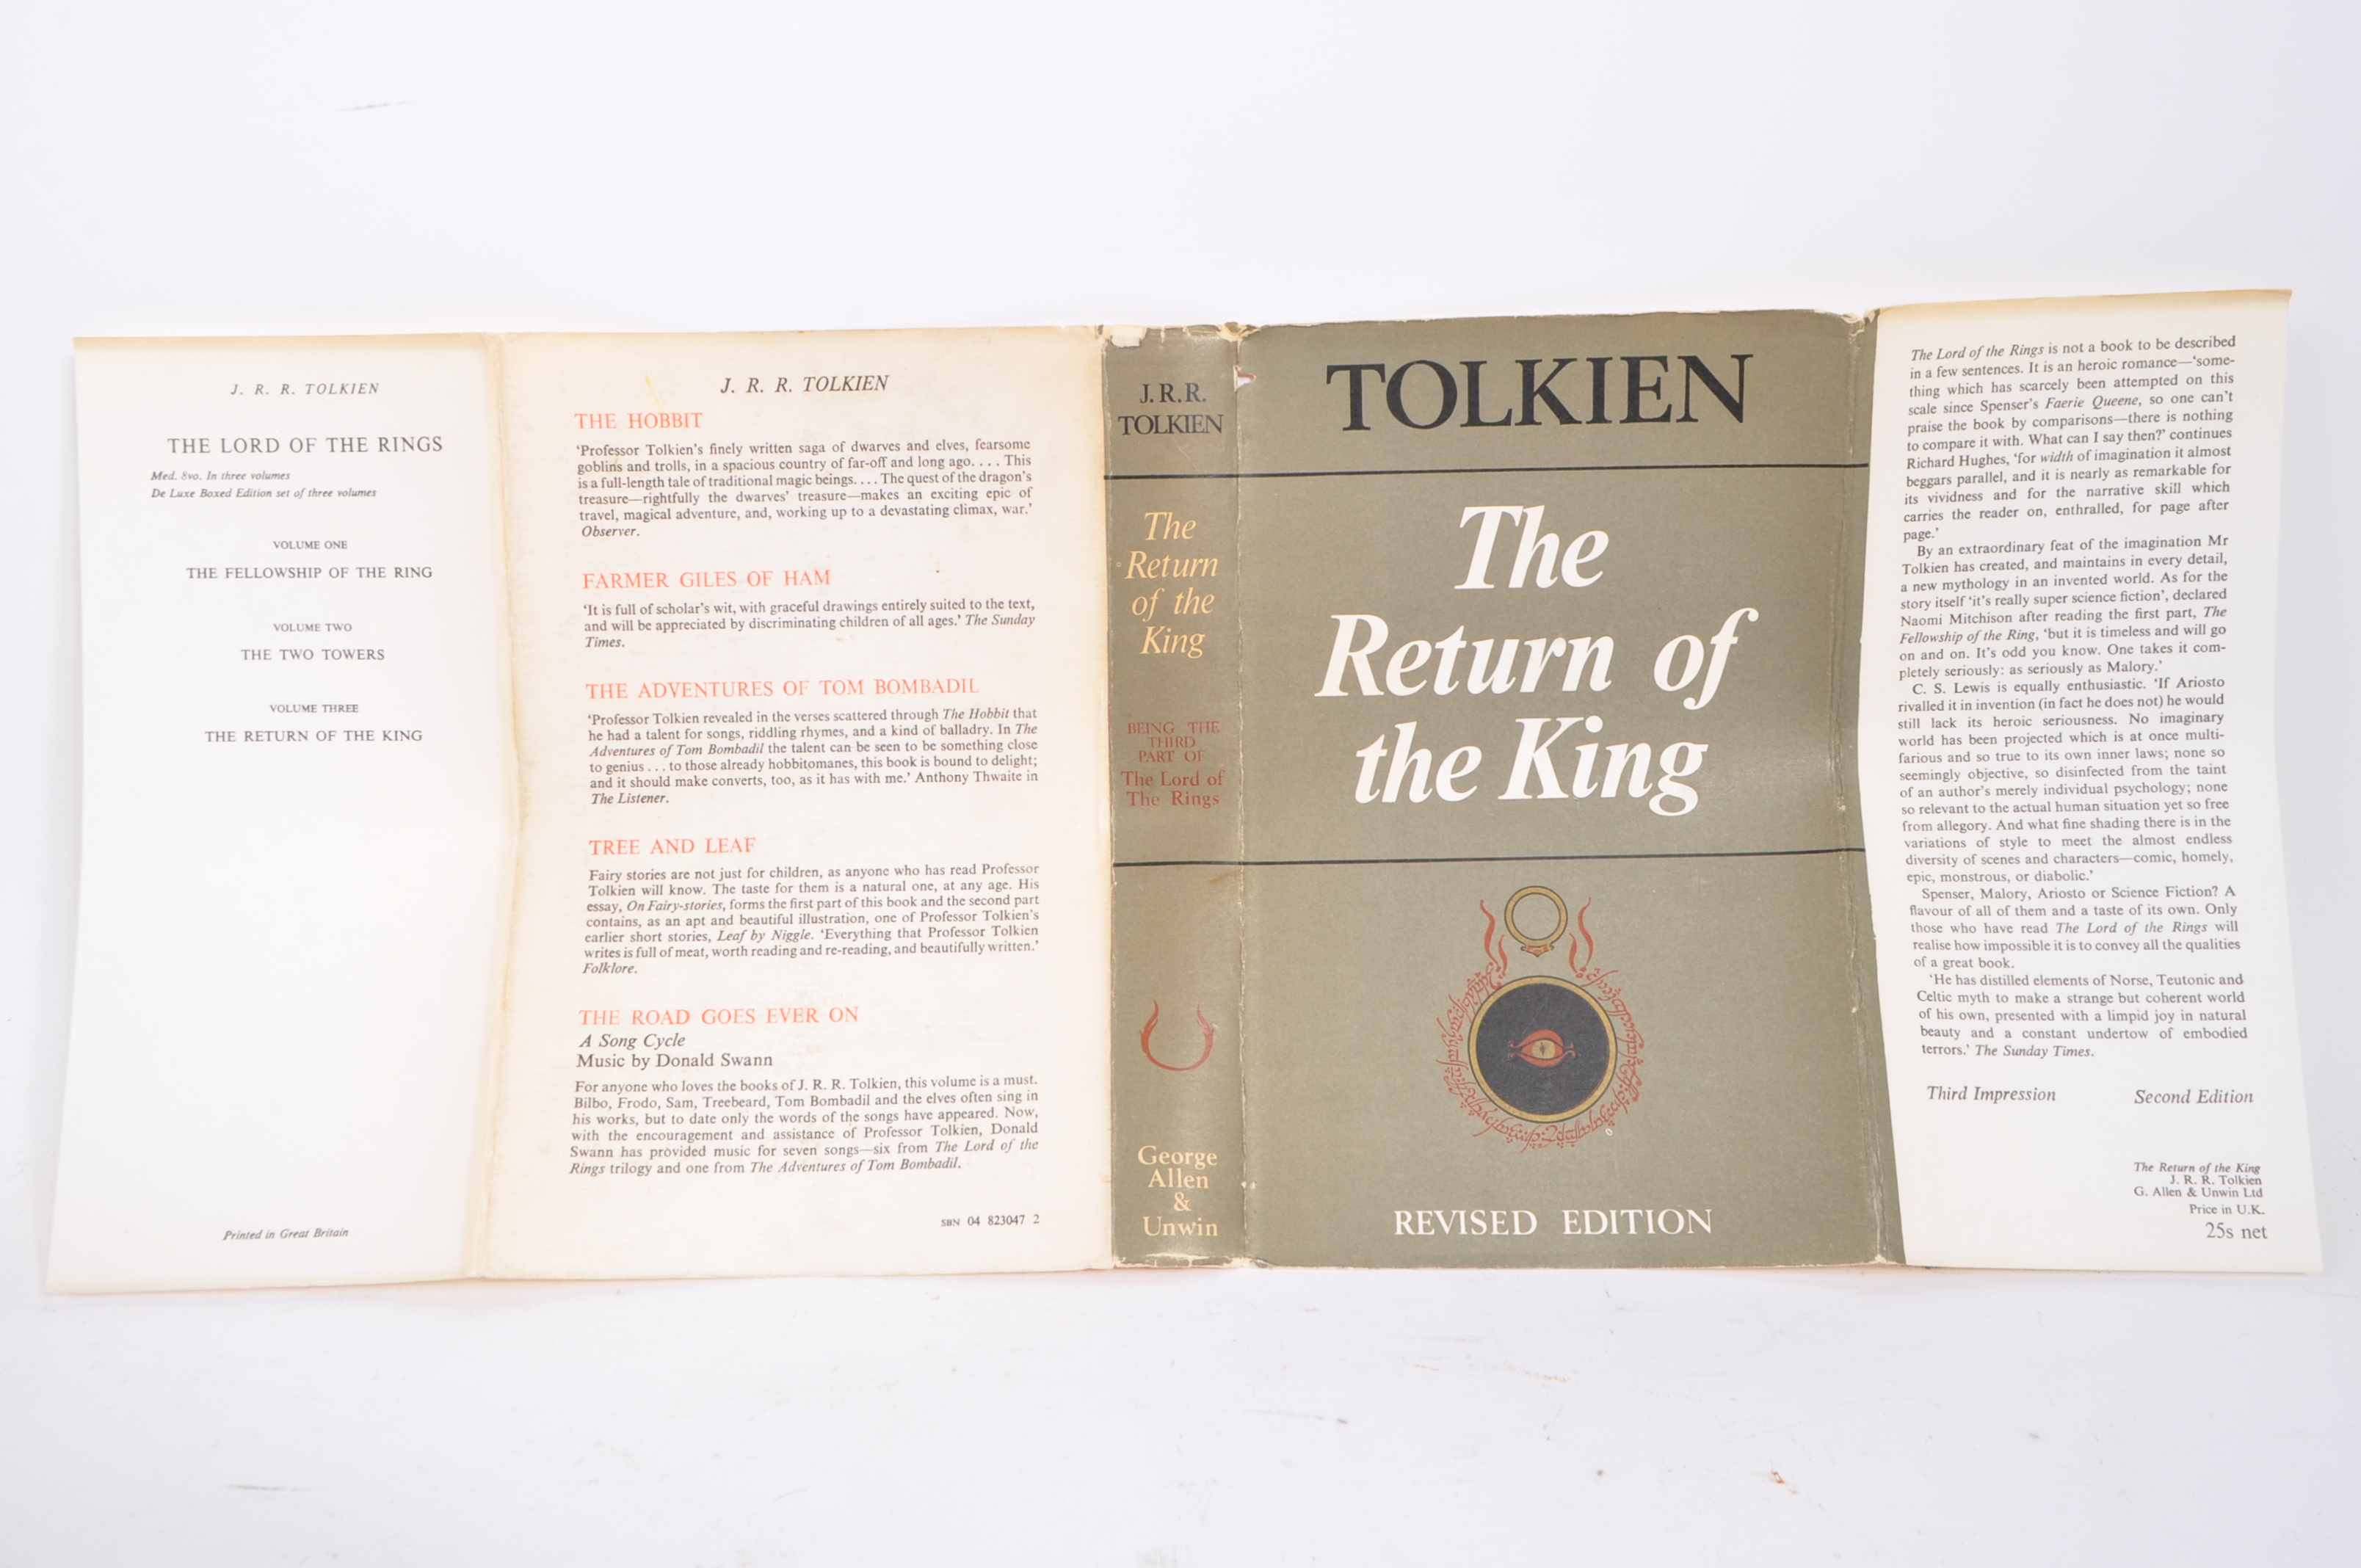 J. R. R. TOLKIEN - LORD OF THE RINGS - THREE 1960S HARDBACK BOOKS - Image 15 of 16